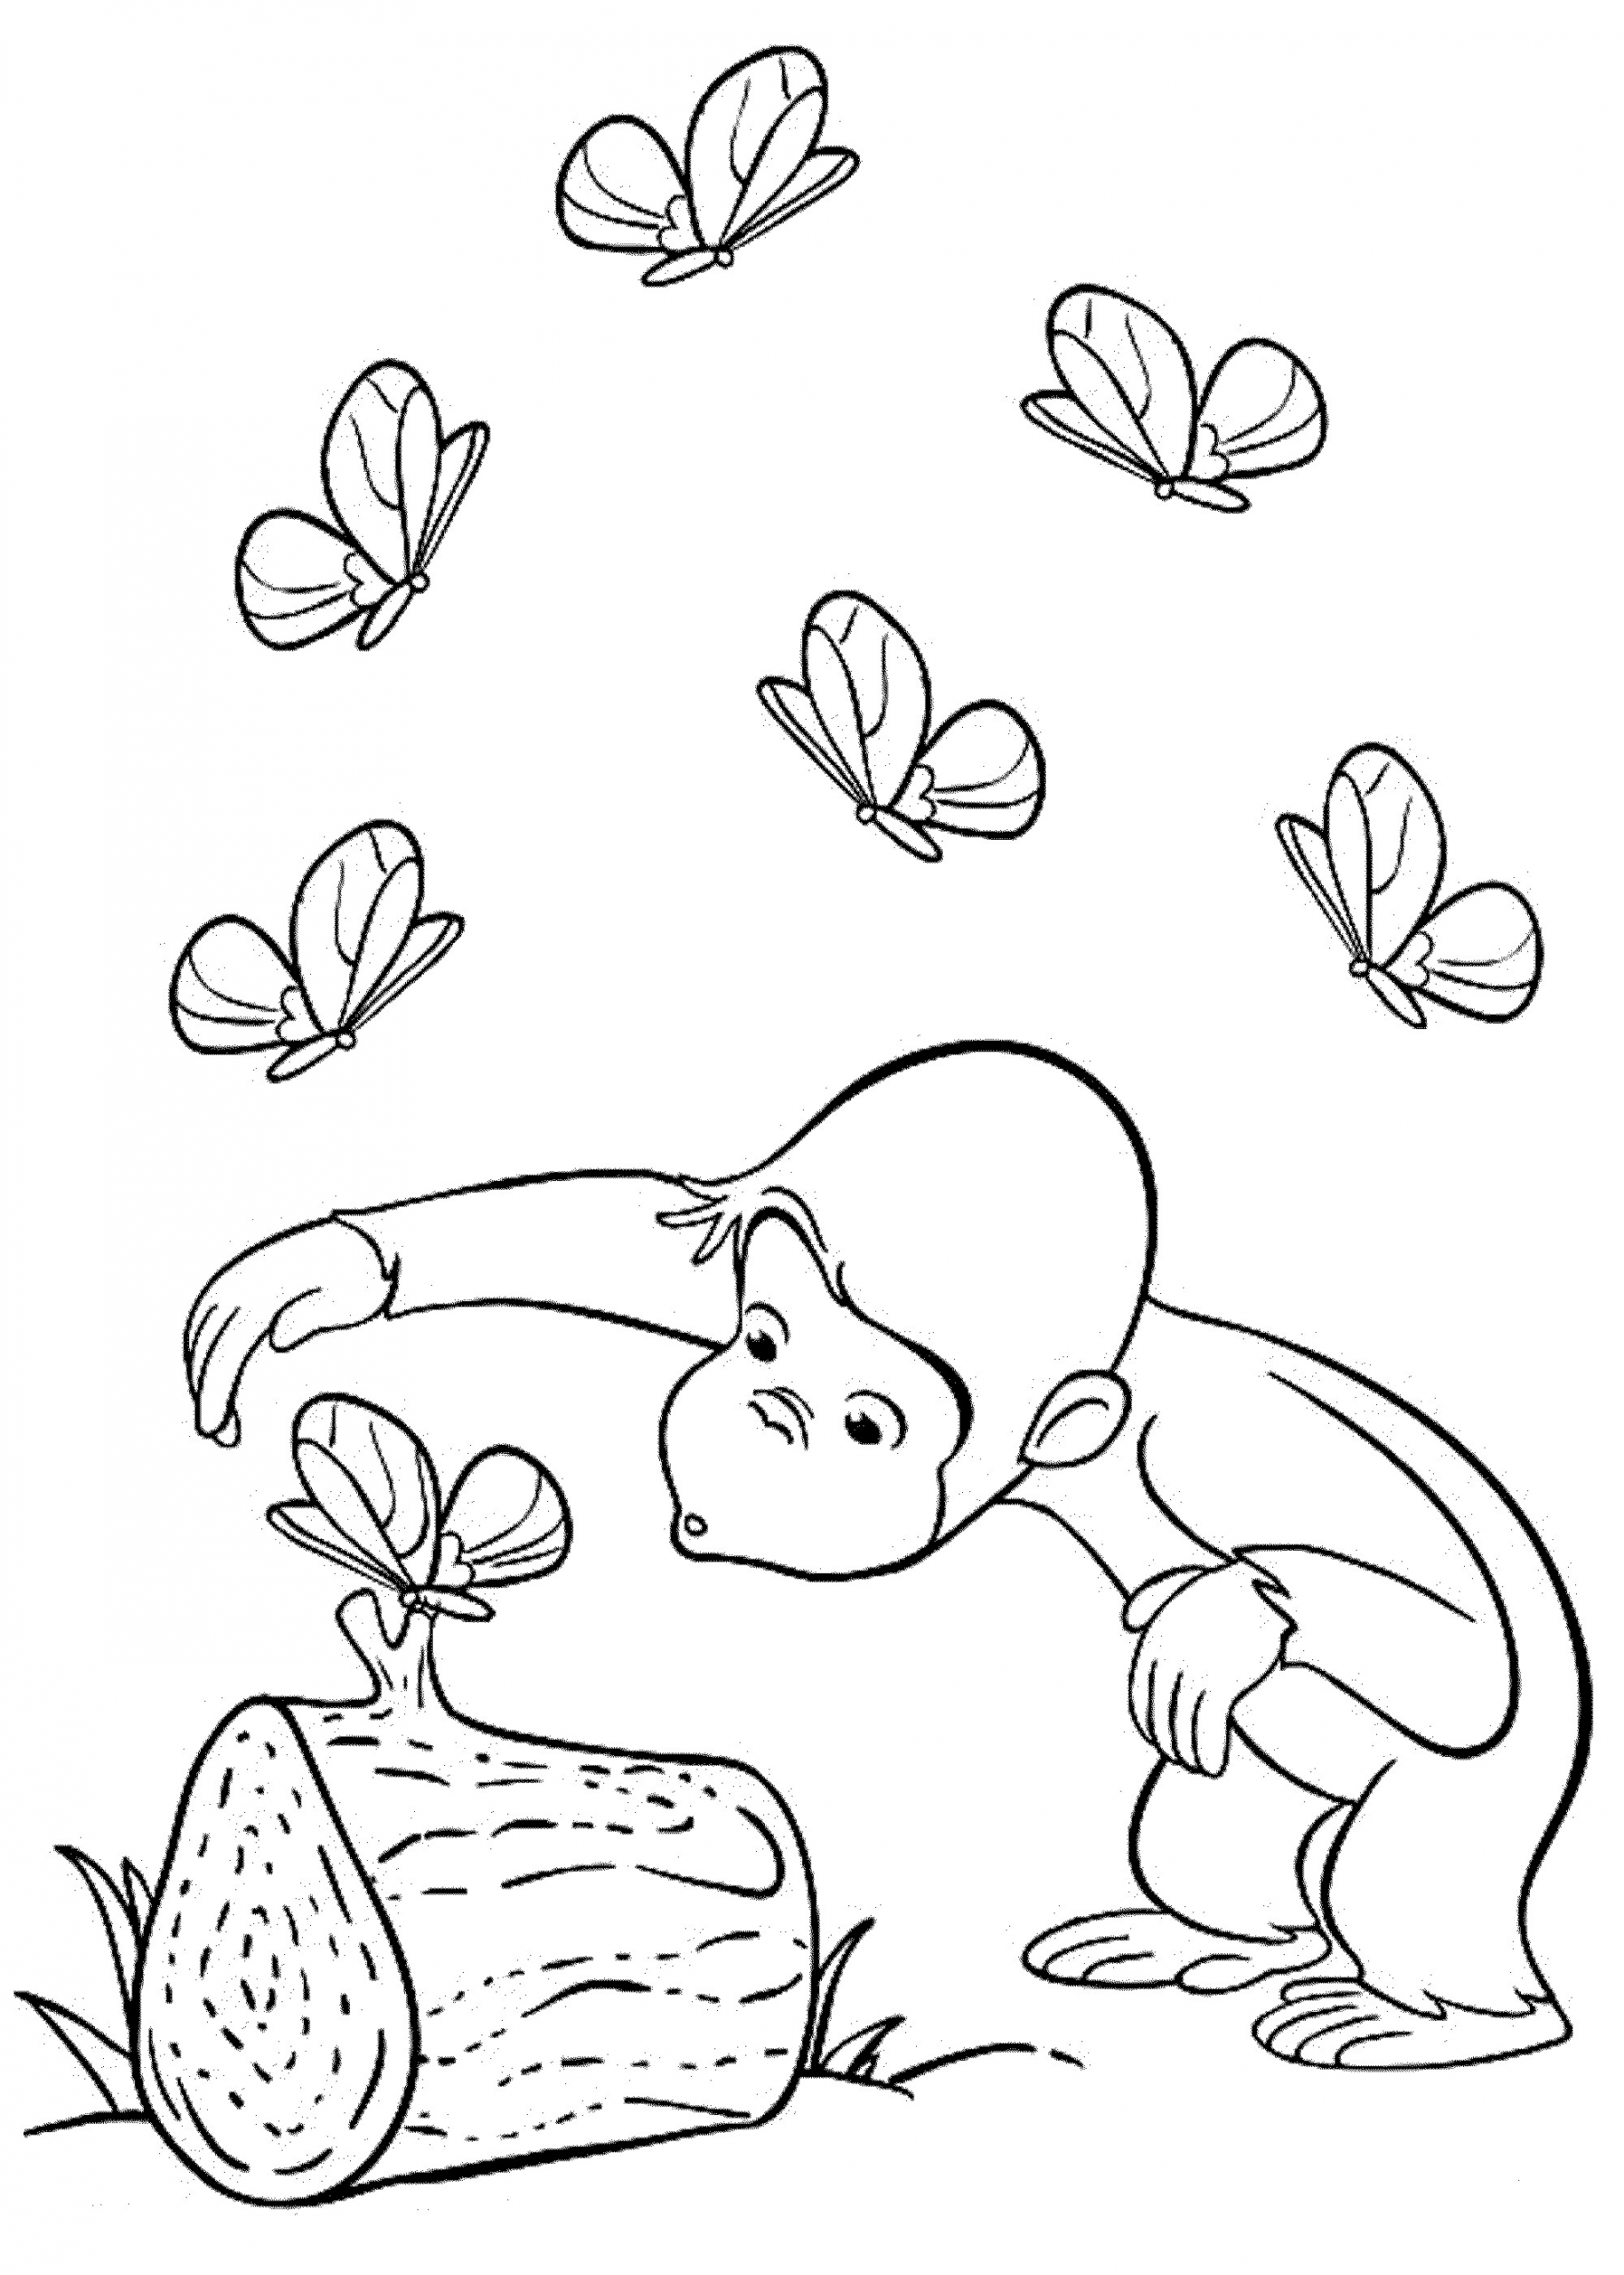 Kids Coloring Sheets
 Curious George Coloring Pages Best Coloring Pages For Kids